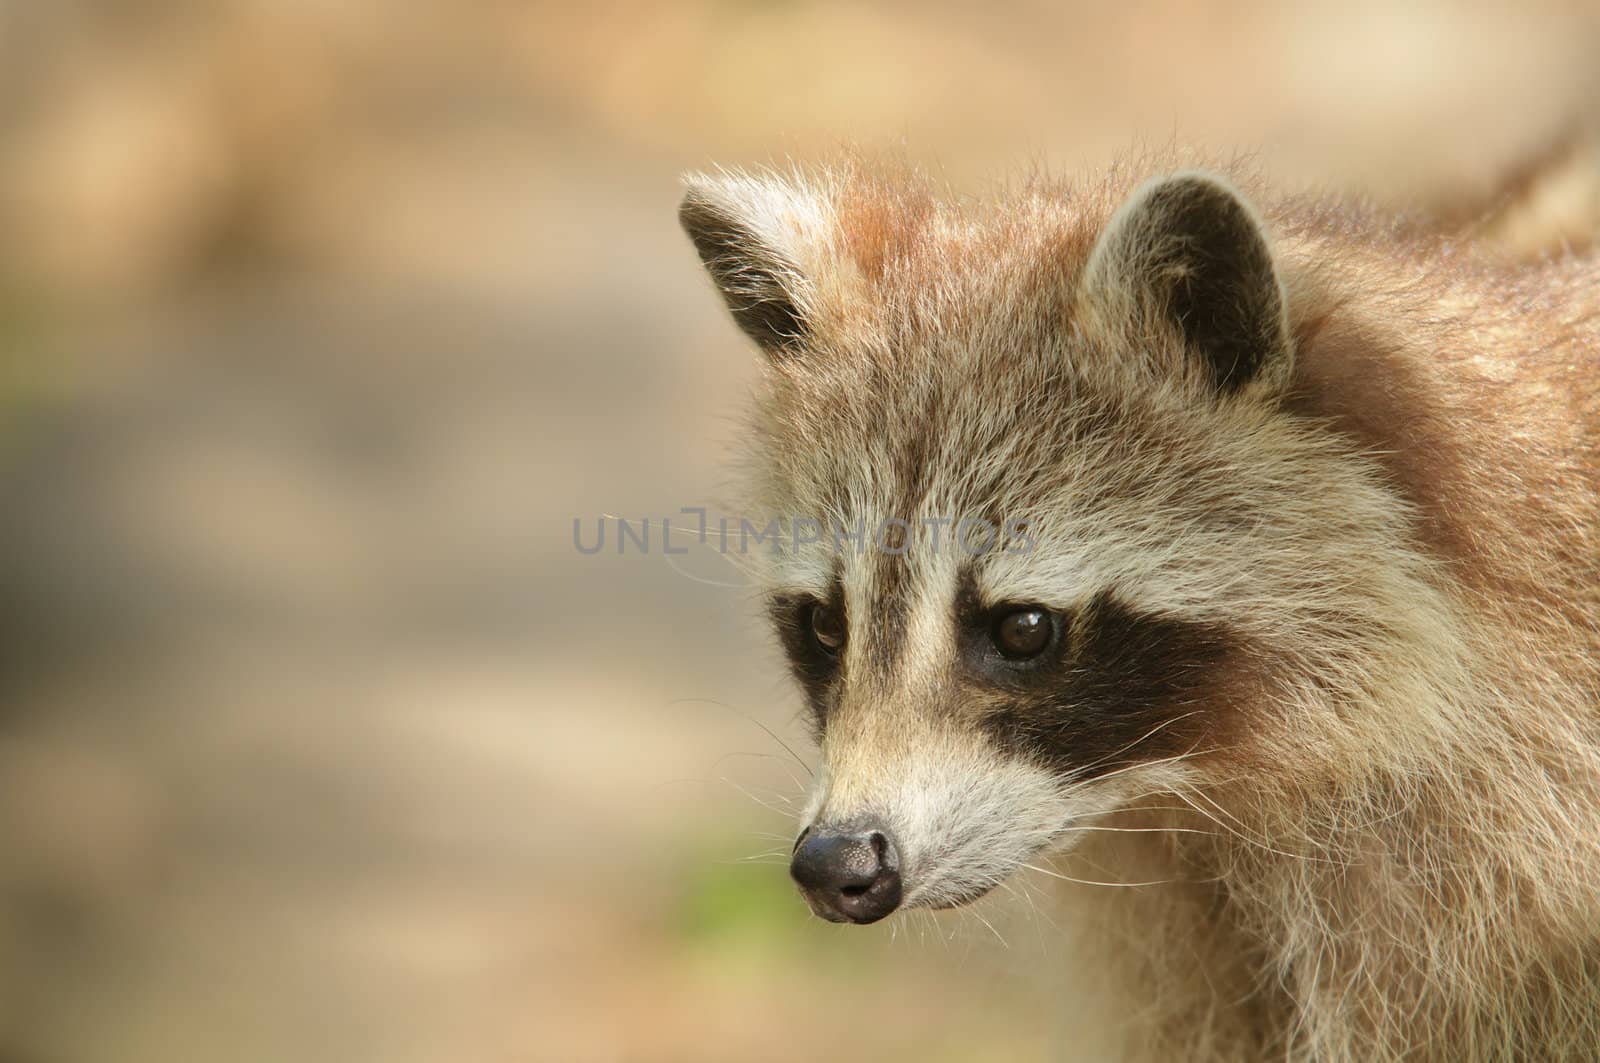 Raccoon portrait with focus on eyes